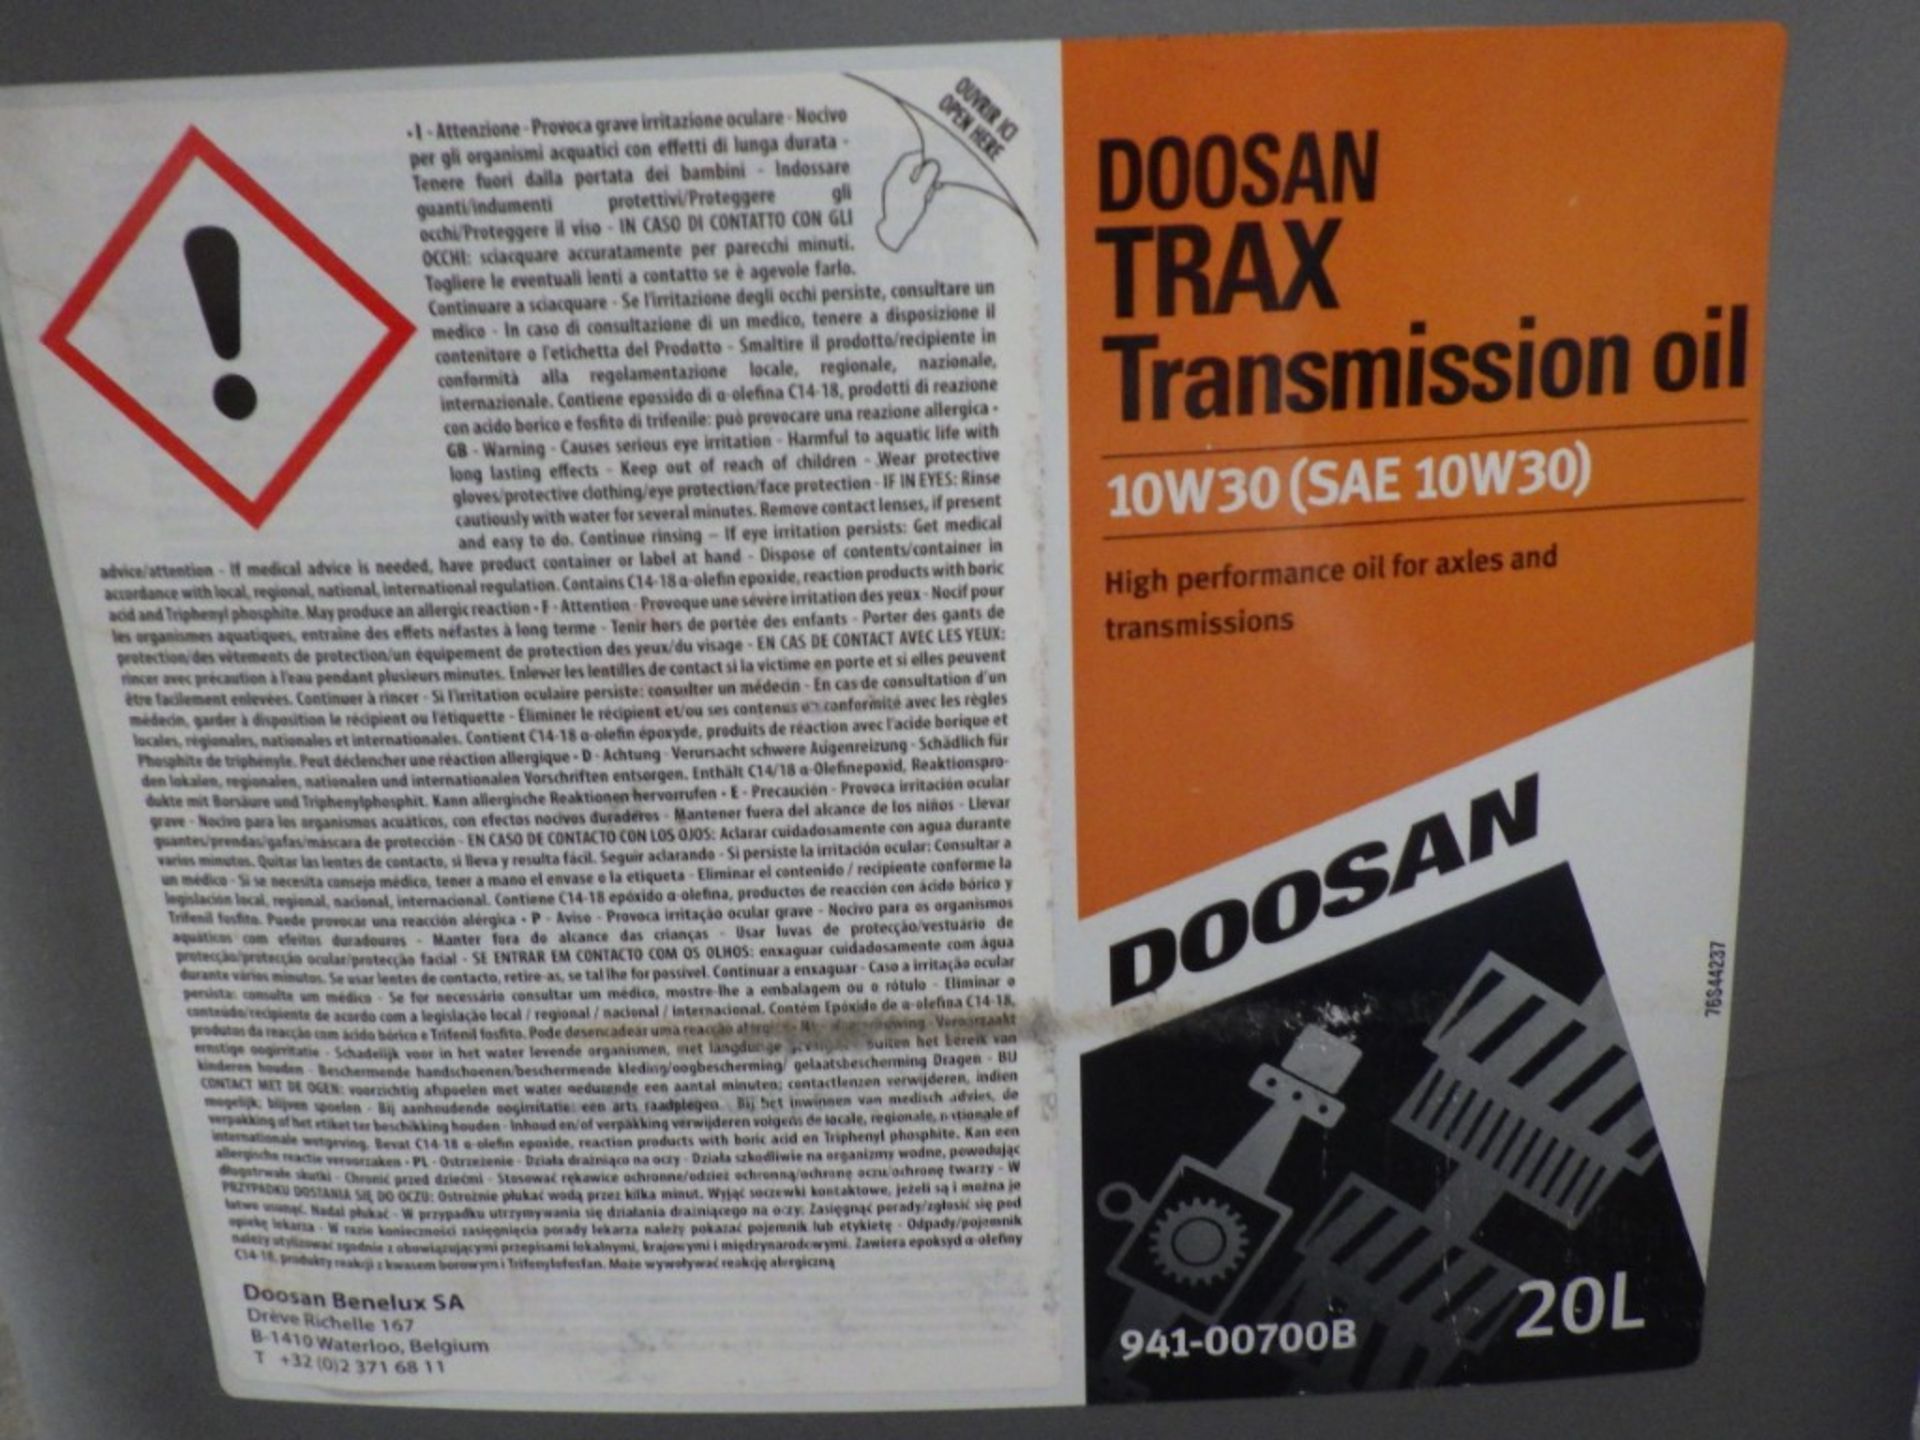 DOOSAN 10W30 (SAE 10W30) TRAX TRANSMISSION OIL HIGH PERFORMANCE FOR AXLES & TRANSMISSIONS, 20L - Image 3 of 4